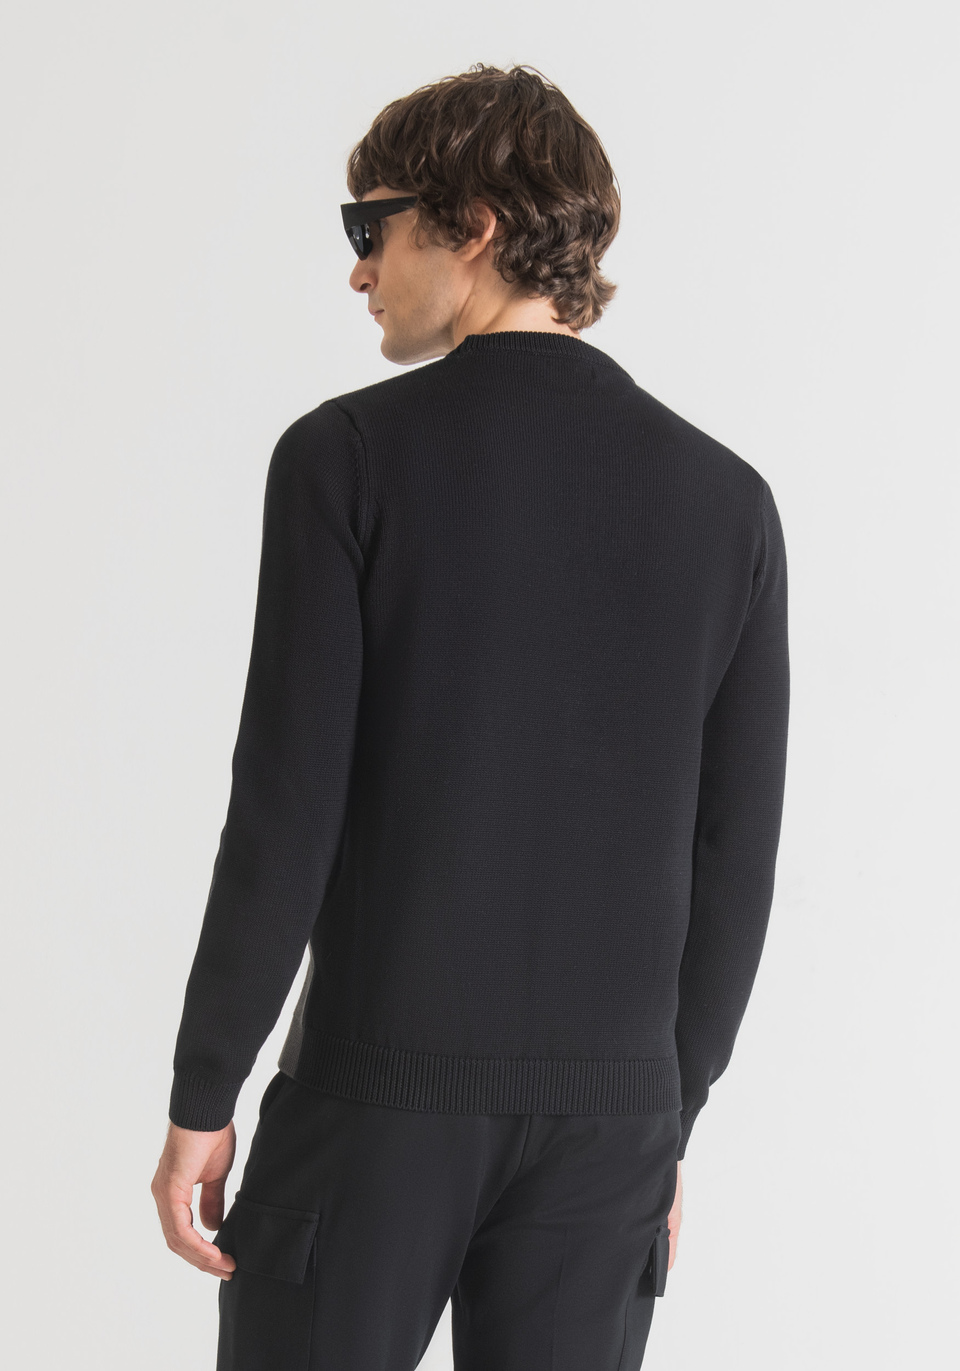 SLIM FIT SWEATER IN SOFT COTTON YARN WITH CONTRASTING JACQUARD KNIT - Antony Morato Online Shop